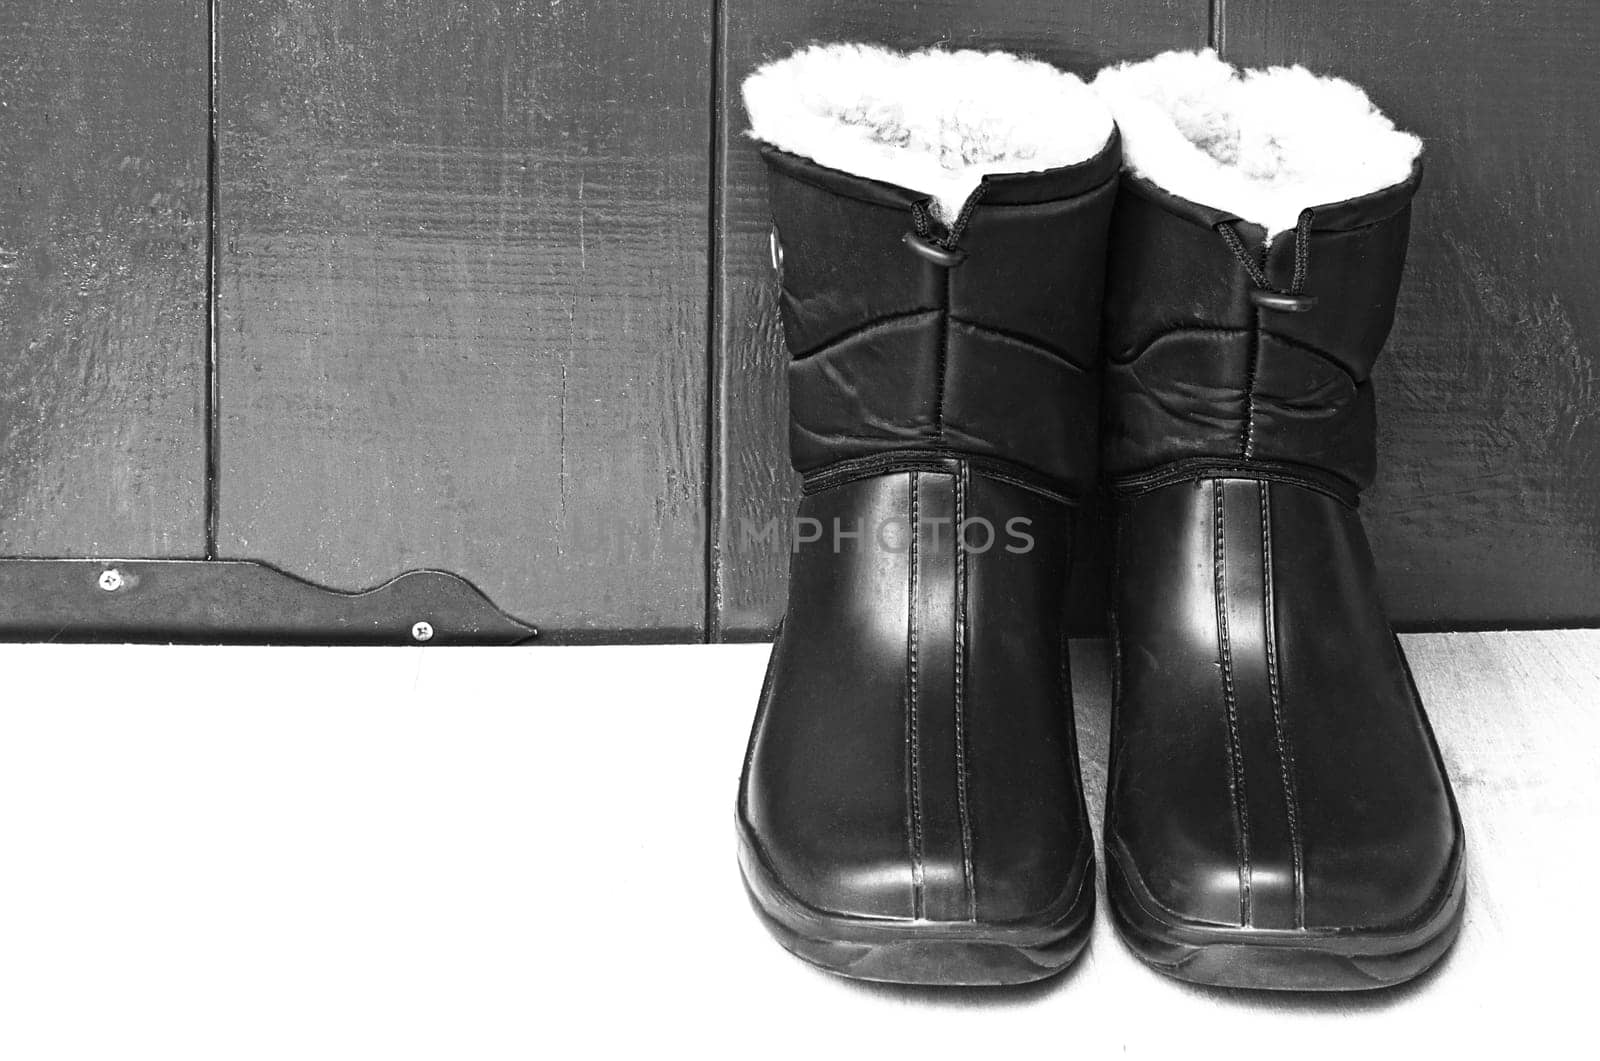 On the table near the wooden wall are warm waterproof men's boots for work or fishing.